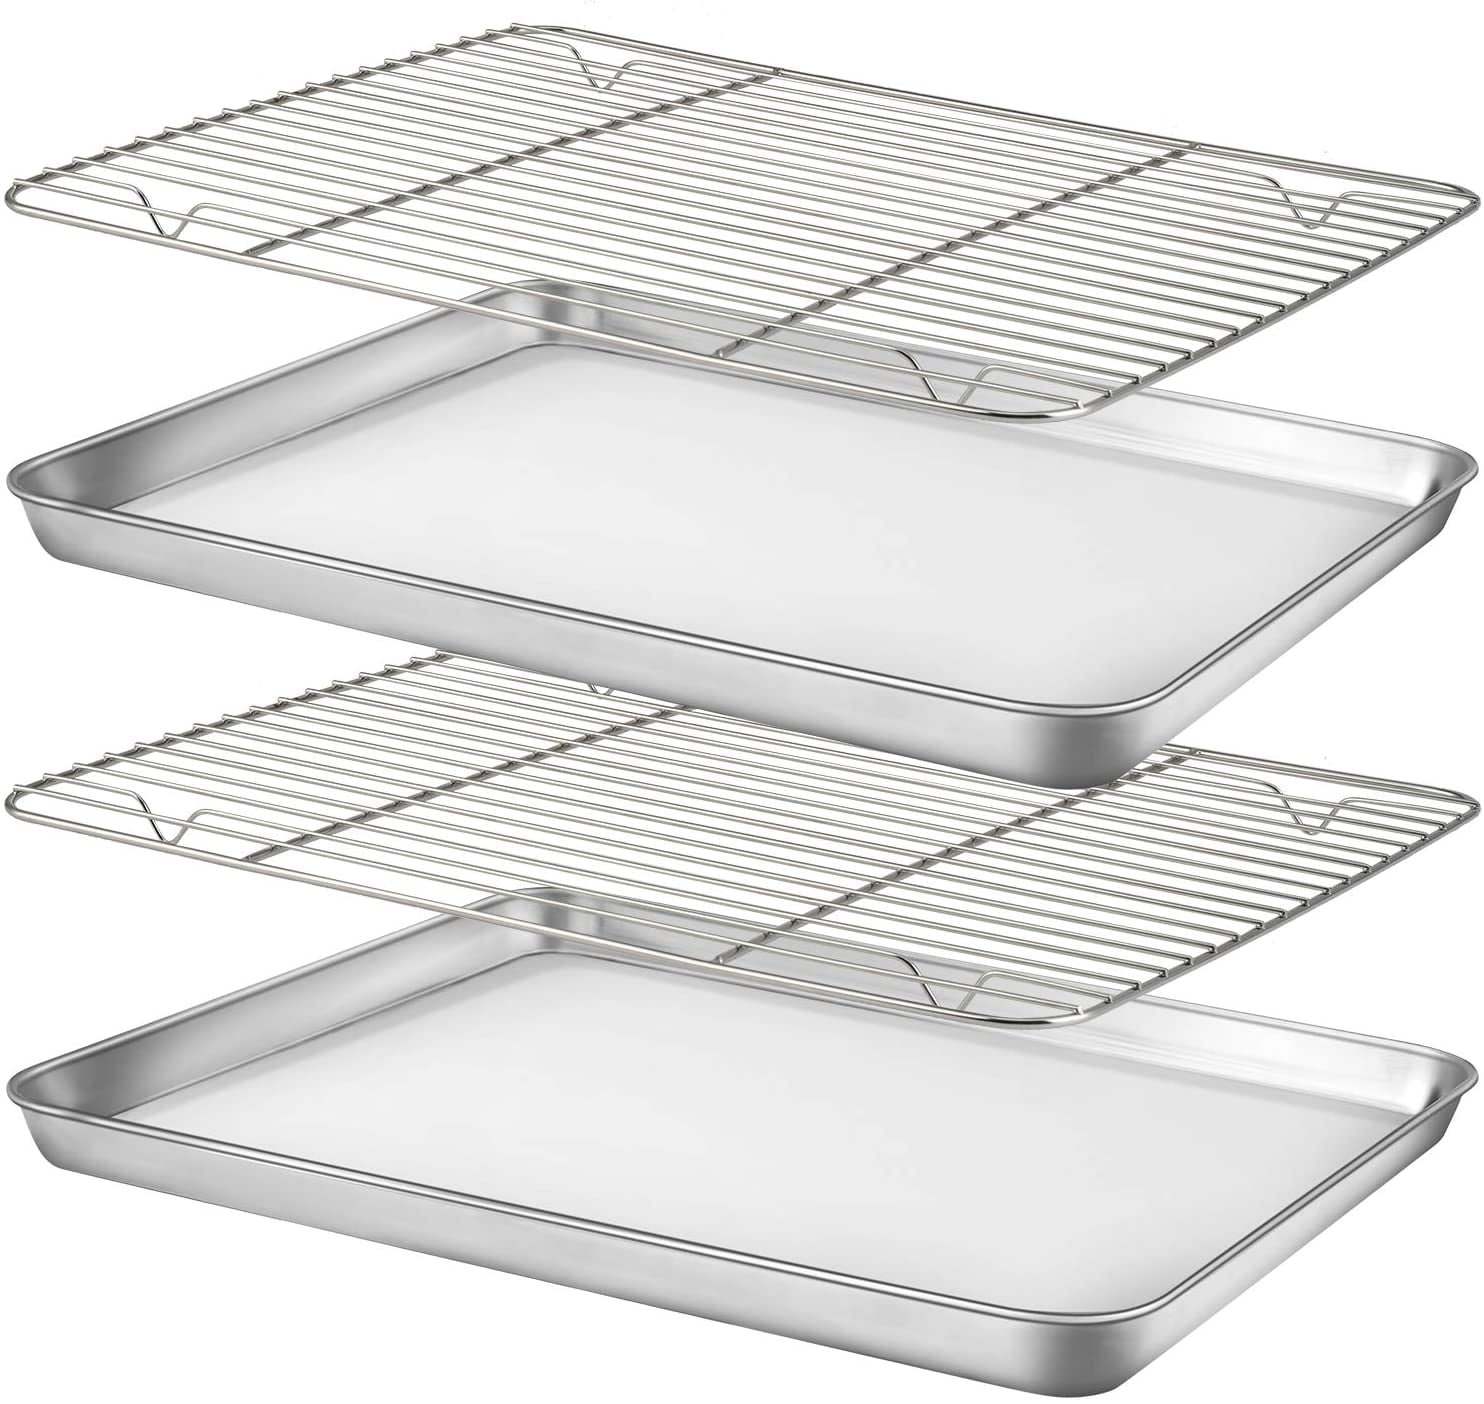 Perfect Baking Cooling Rack Kitchen Bakery Cookies Wire Nonstick Grid Sheet Pan 